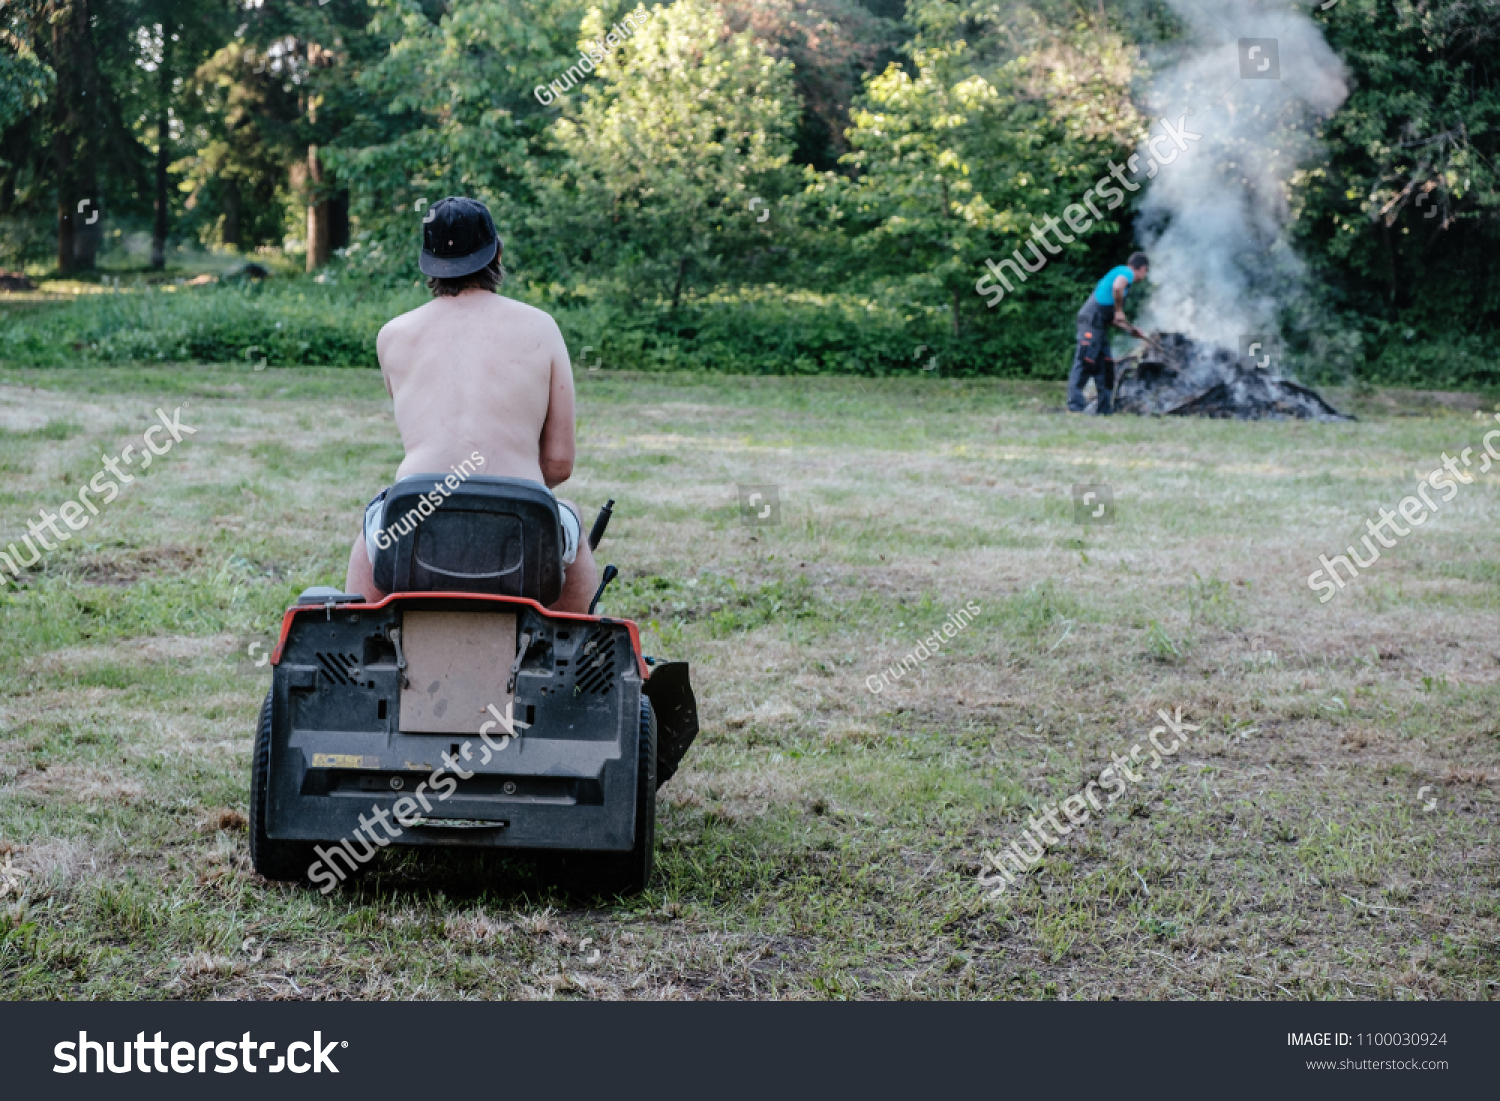 Naked Man Mowing The Lawn